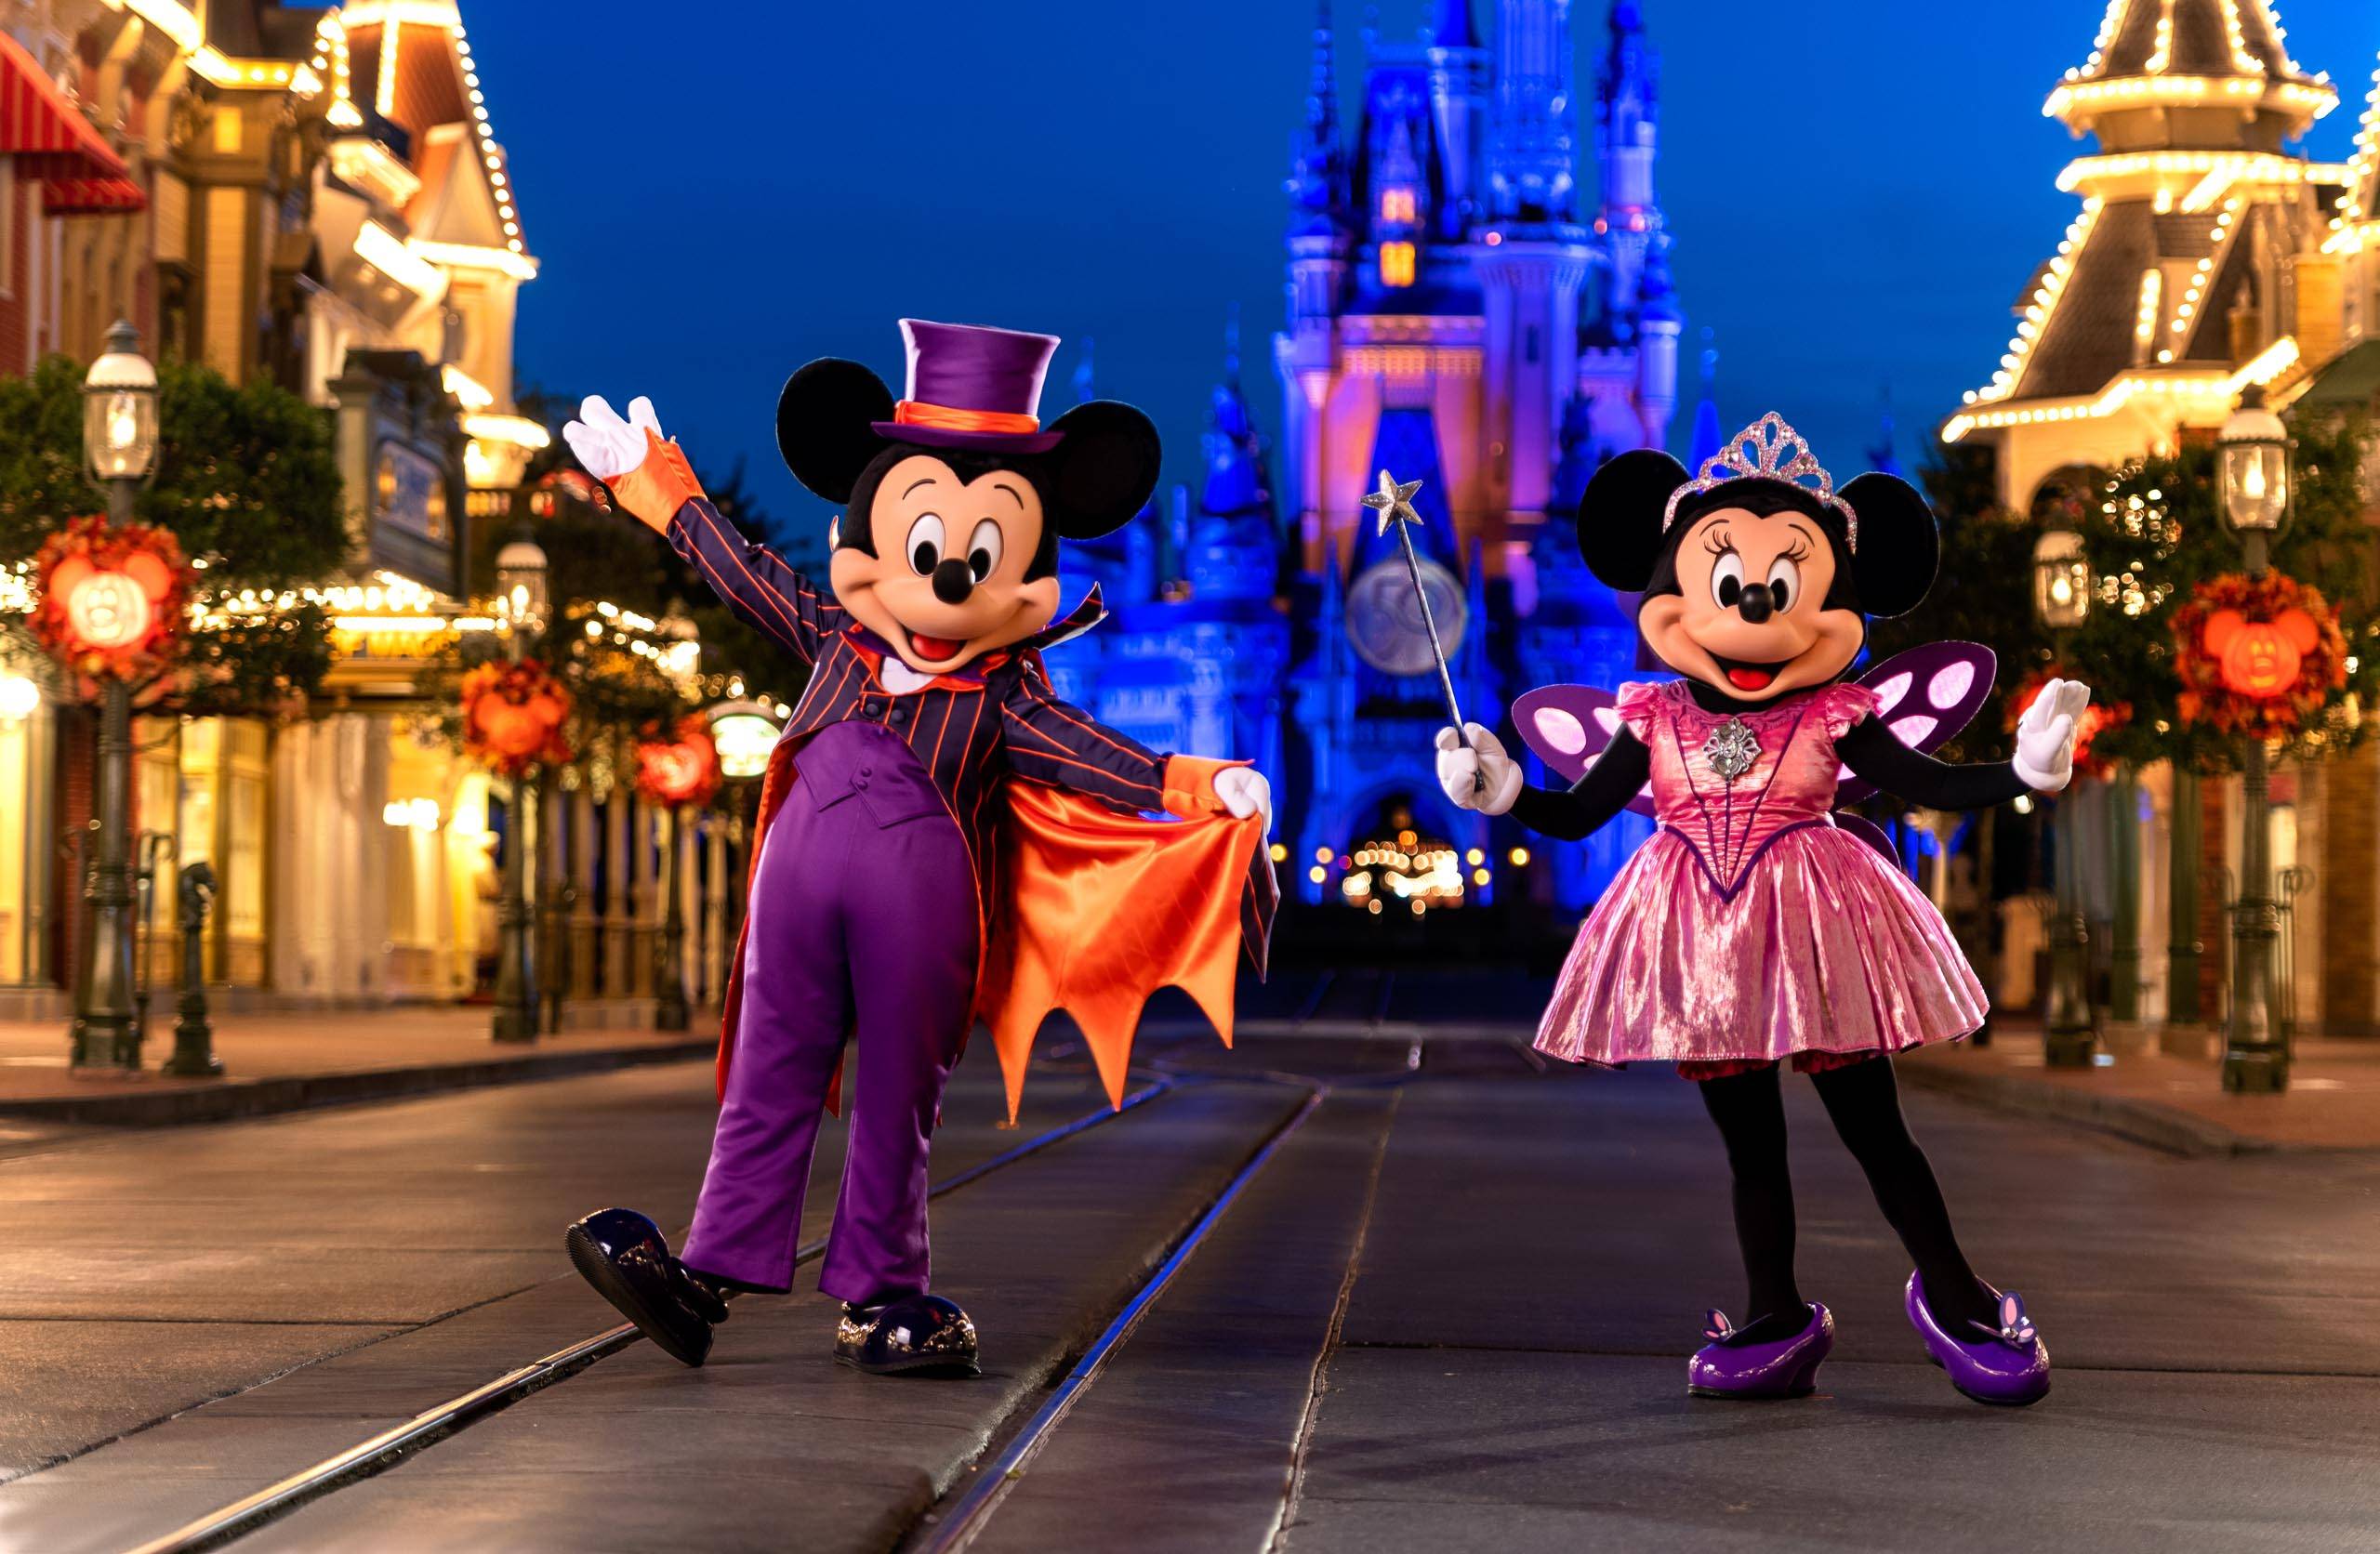 Powerline and Zombies join this year's Mickey's Not-So-Scary Halloween Party at Walt Disney World